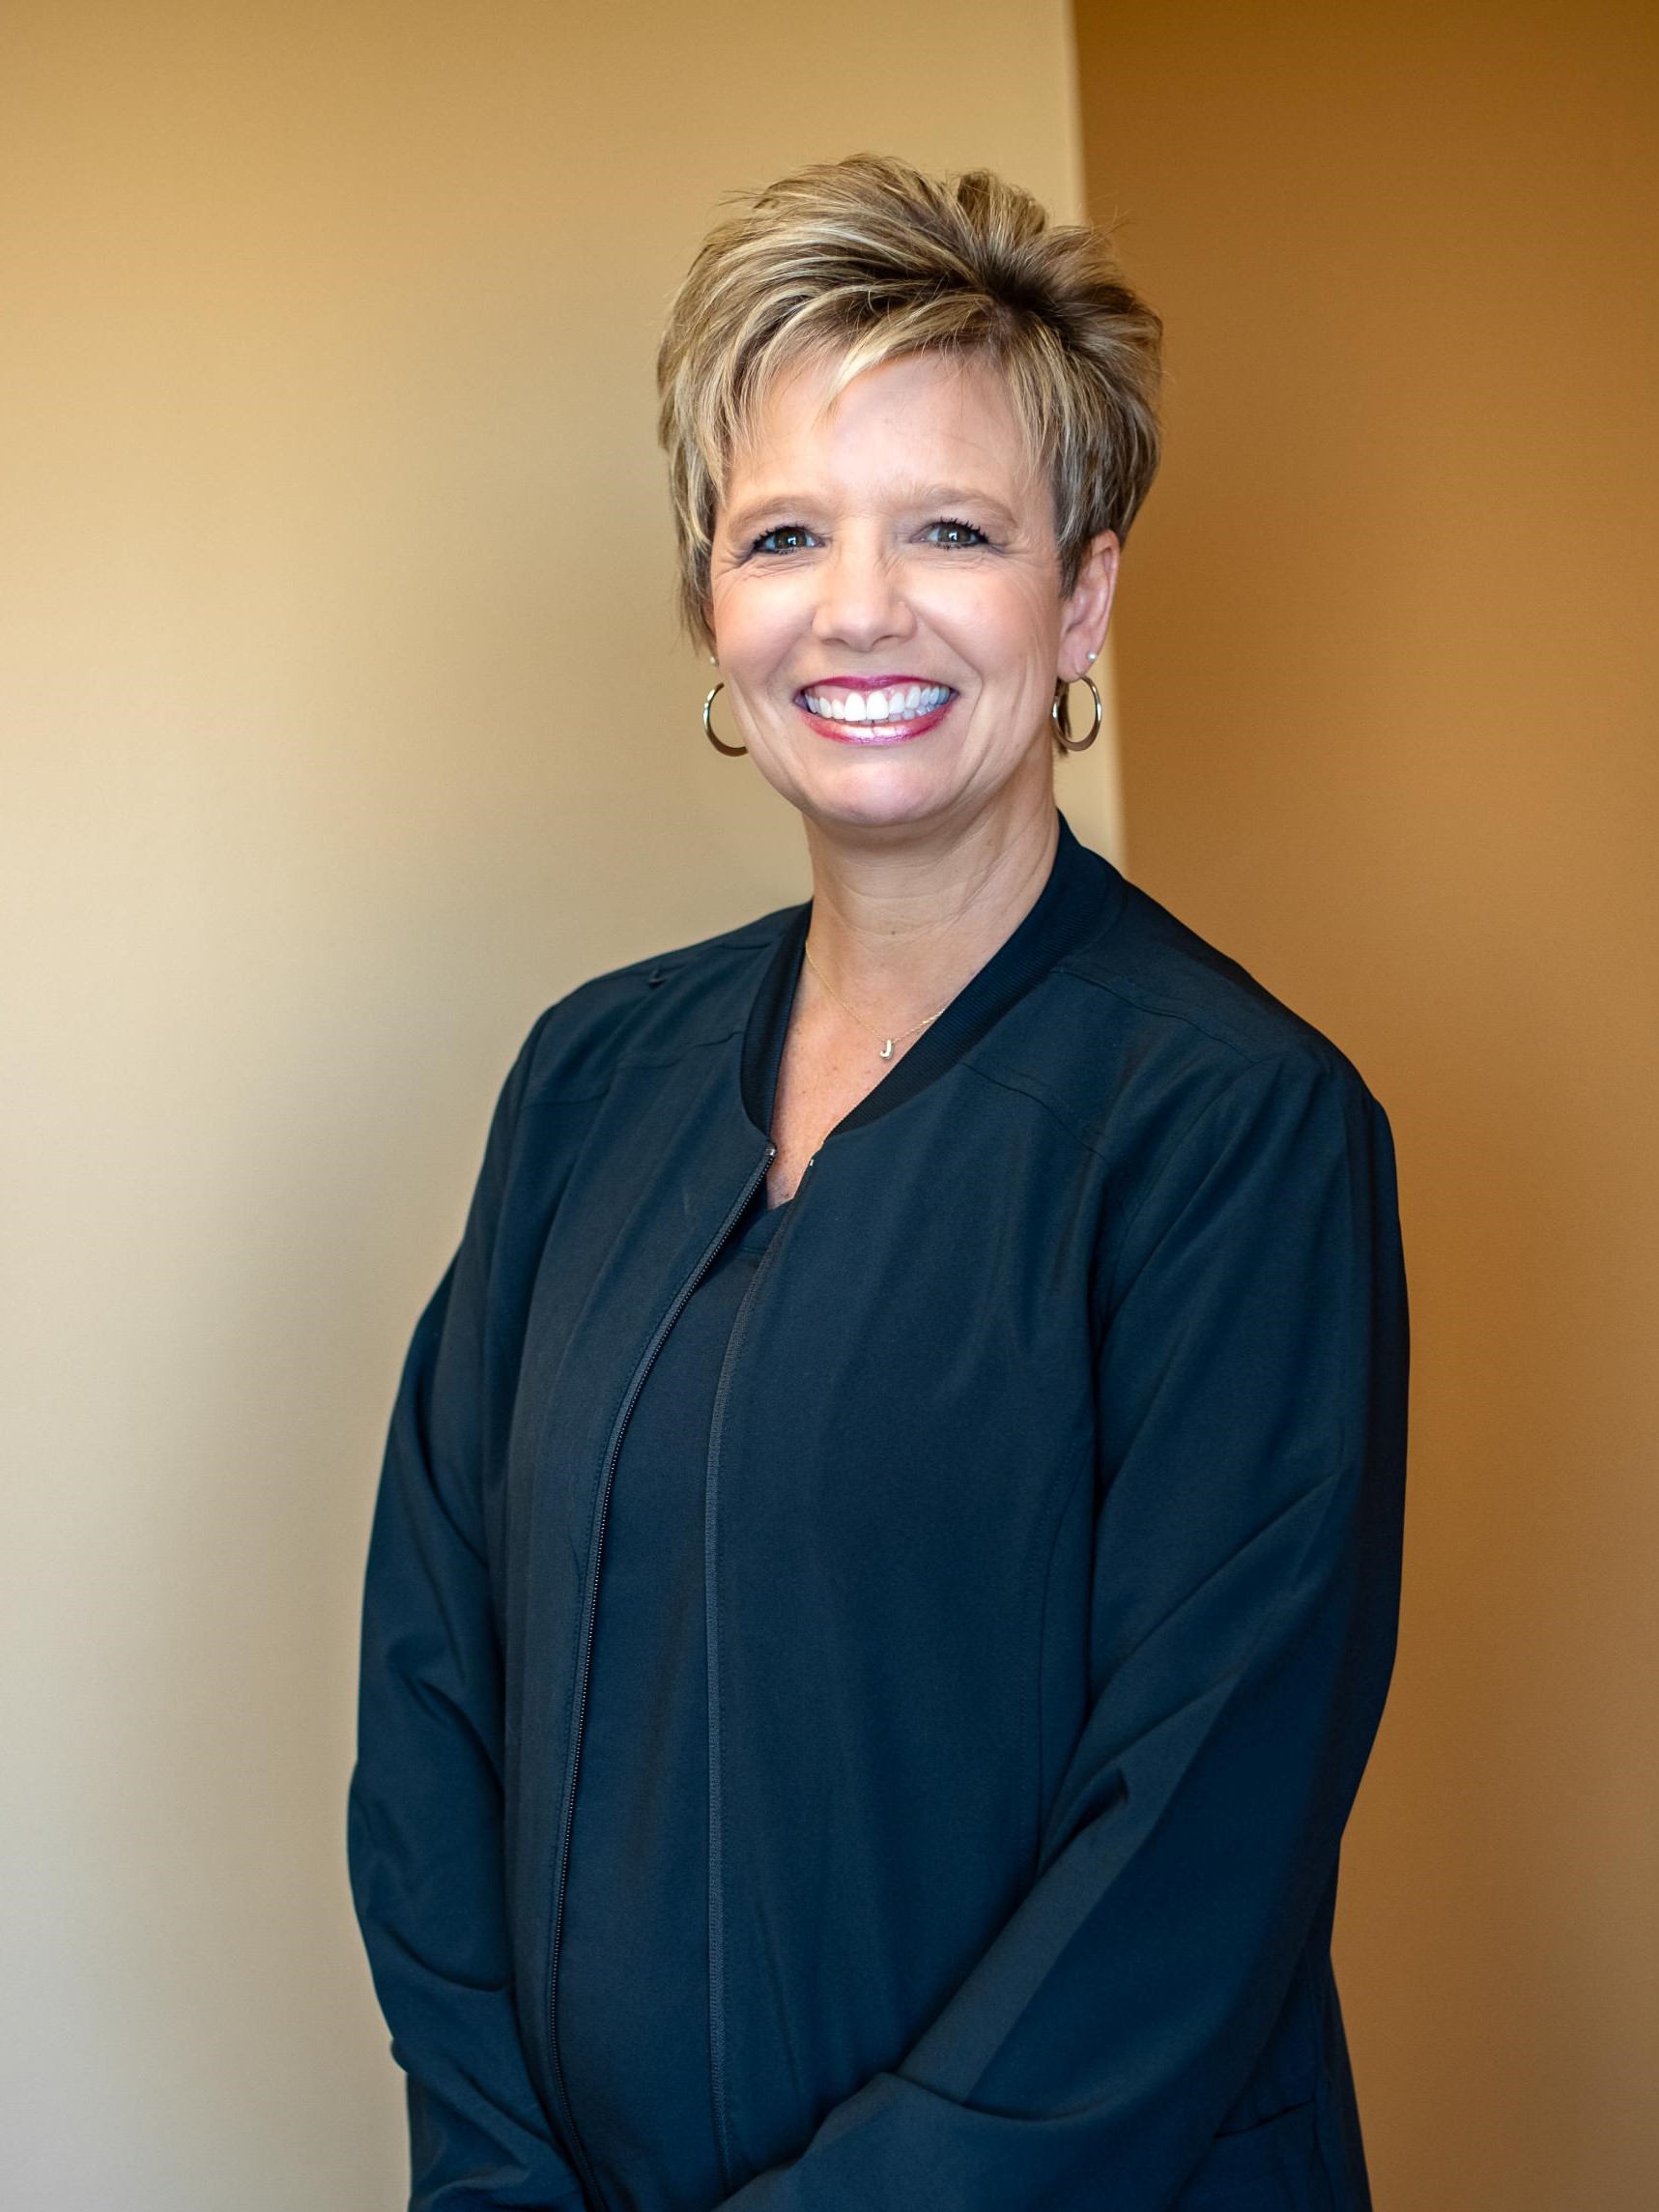 Jenny Shanebrook is a dental assistant and team member at Hale Family Dentistry